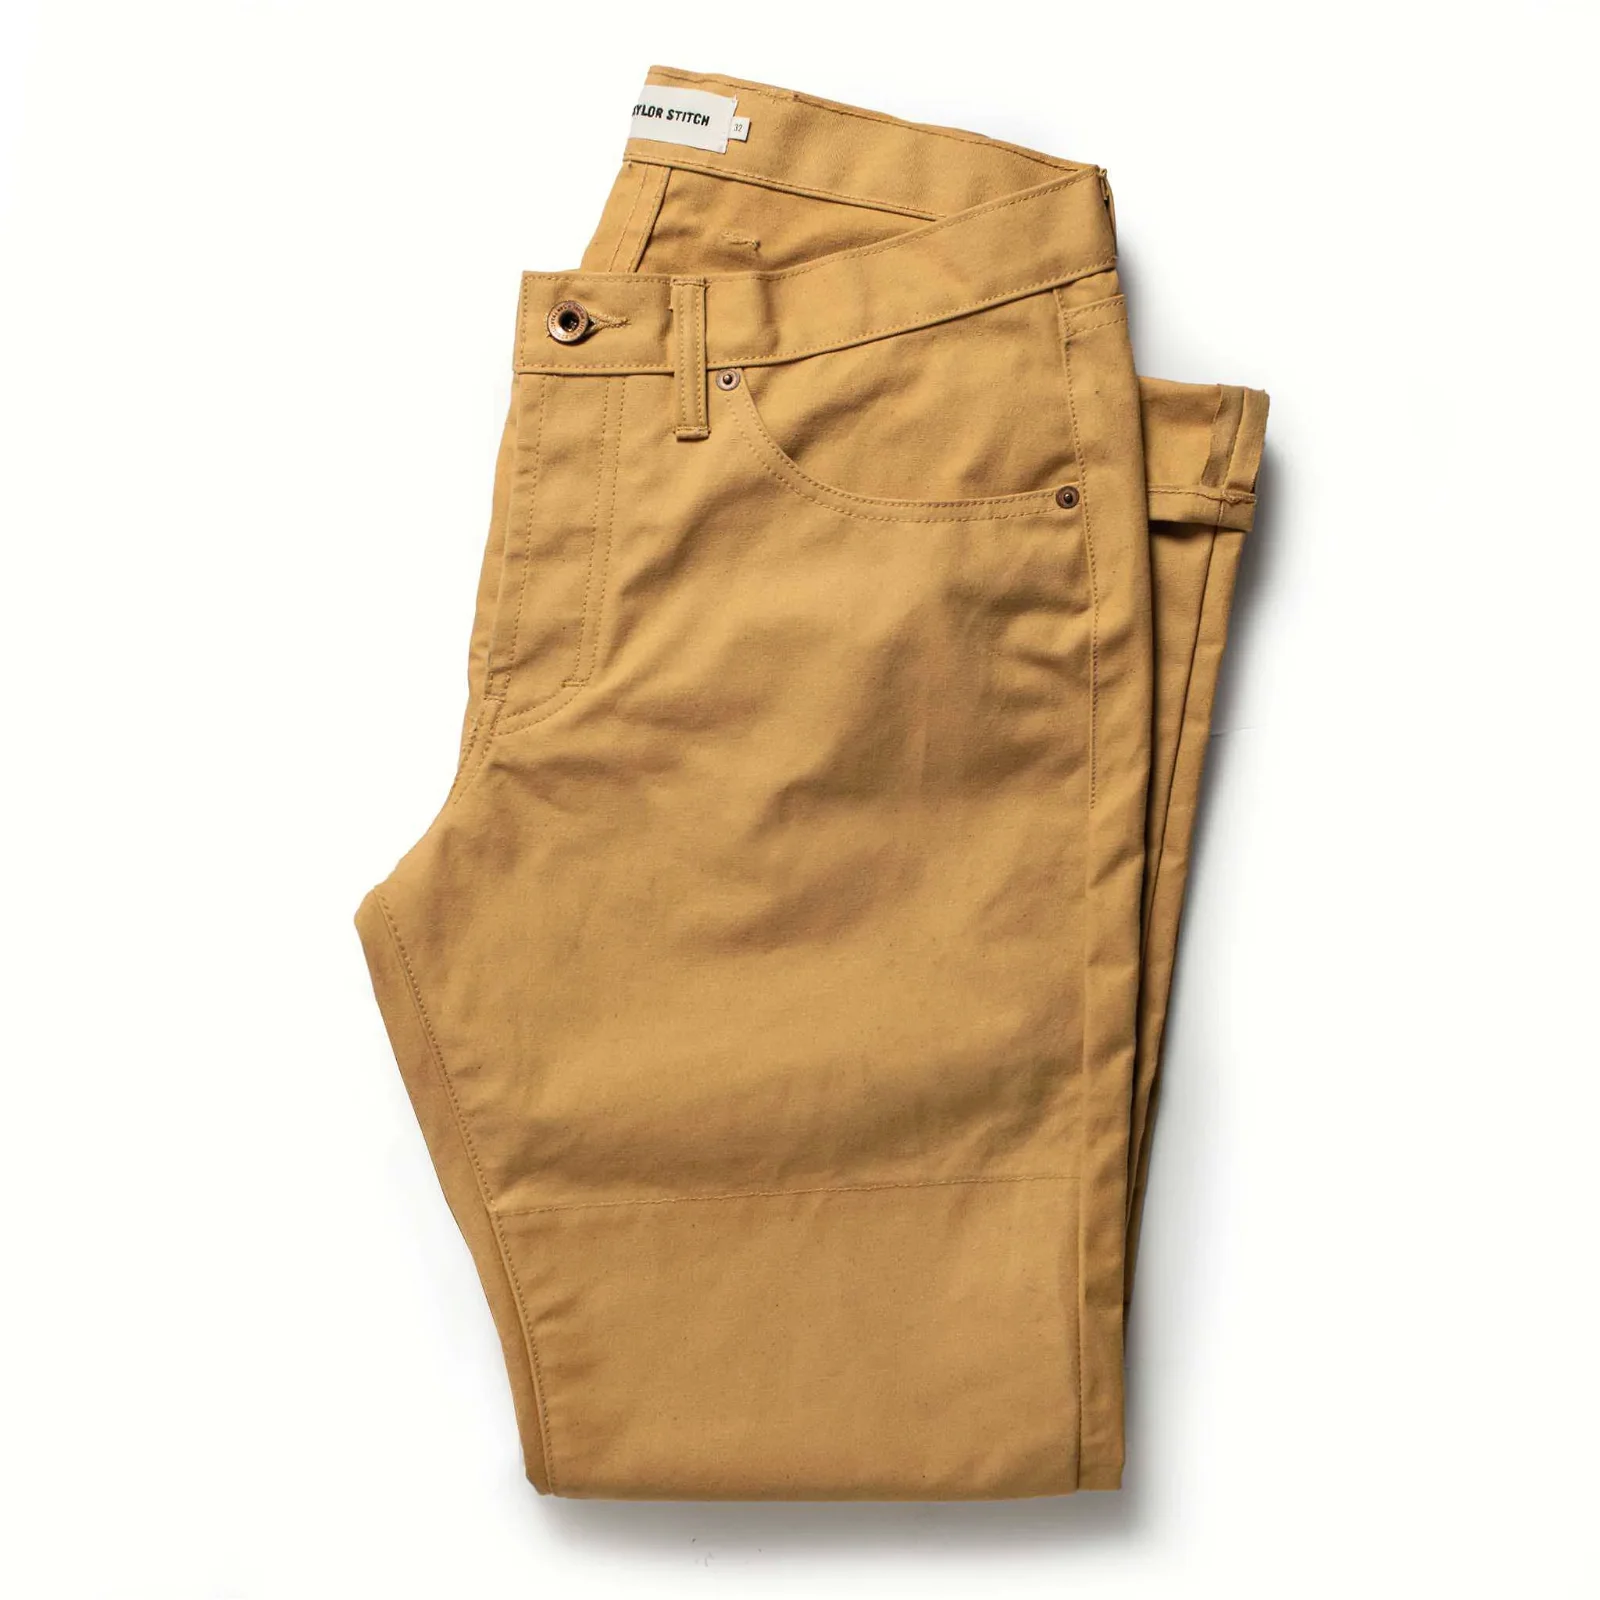 Image of The Wharf Pant in British Khaki Selvage